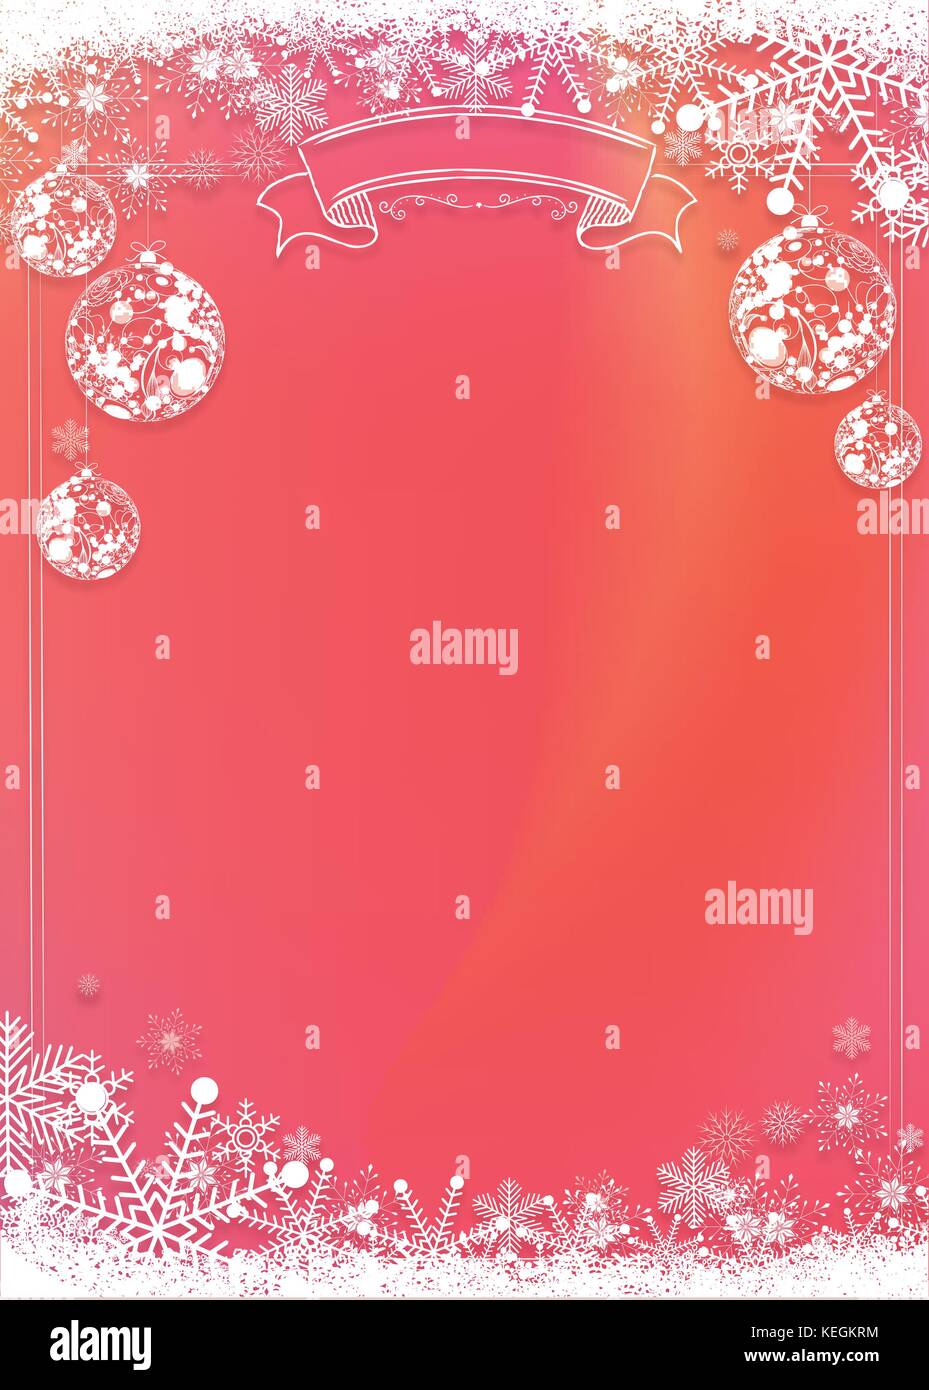 A3 size vertical Cafe menu classic winter christmas gradient red background with xmas ball and snowflake border Stock Vector